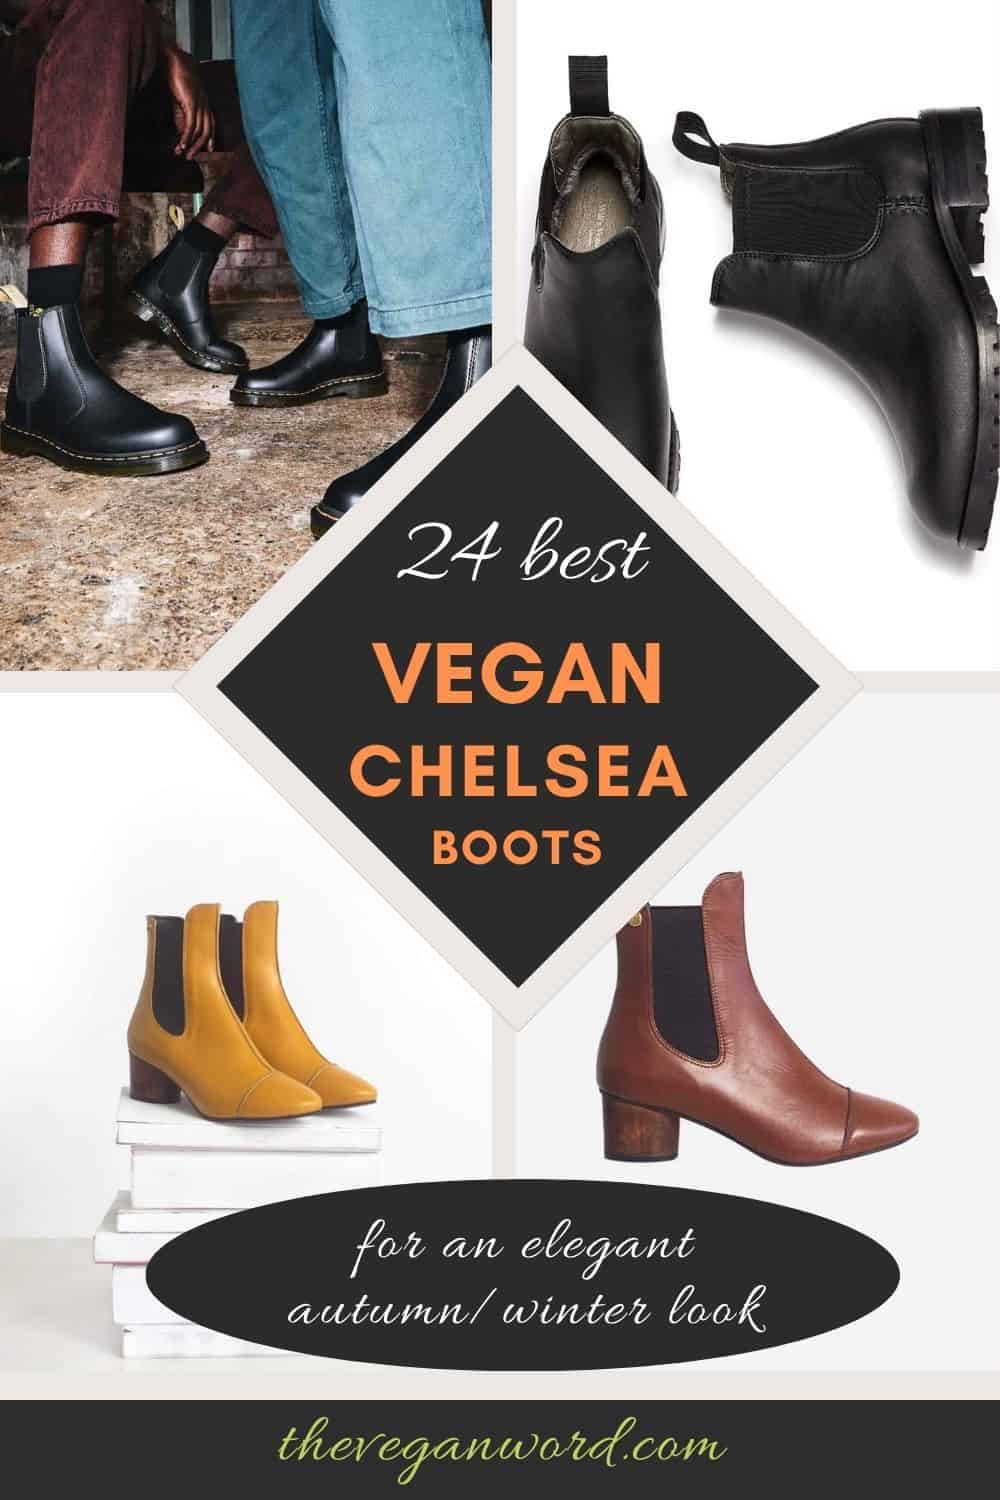 Pinterest image of different vegan Chelsea boot styles with text that reads "24 best vegan chelsea boots for an elegant autumn/winter look"